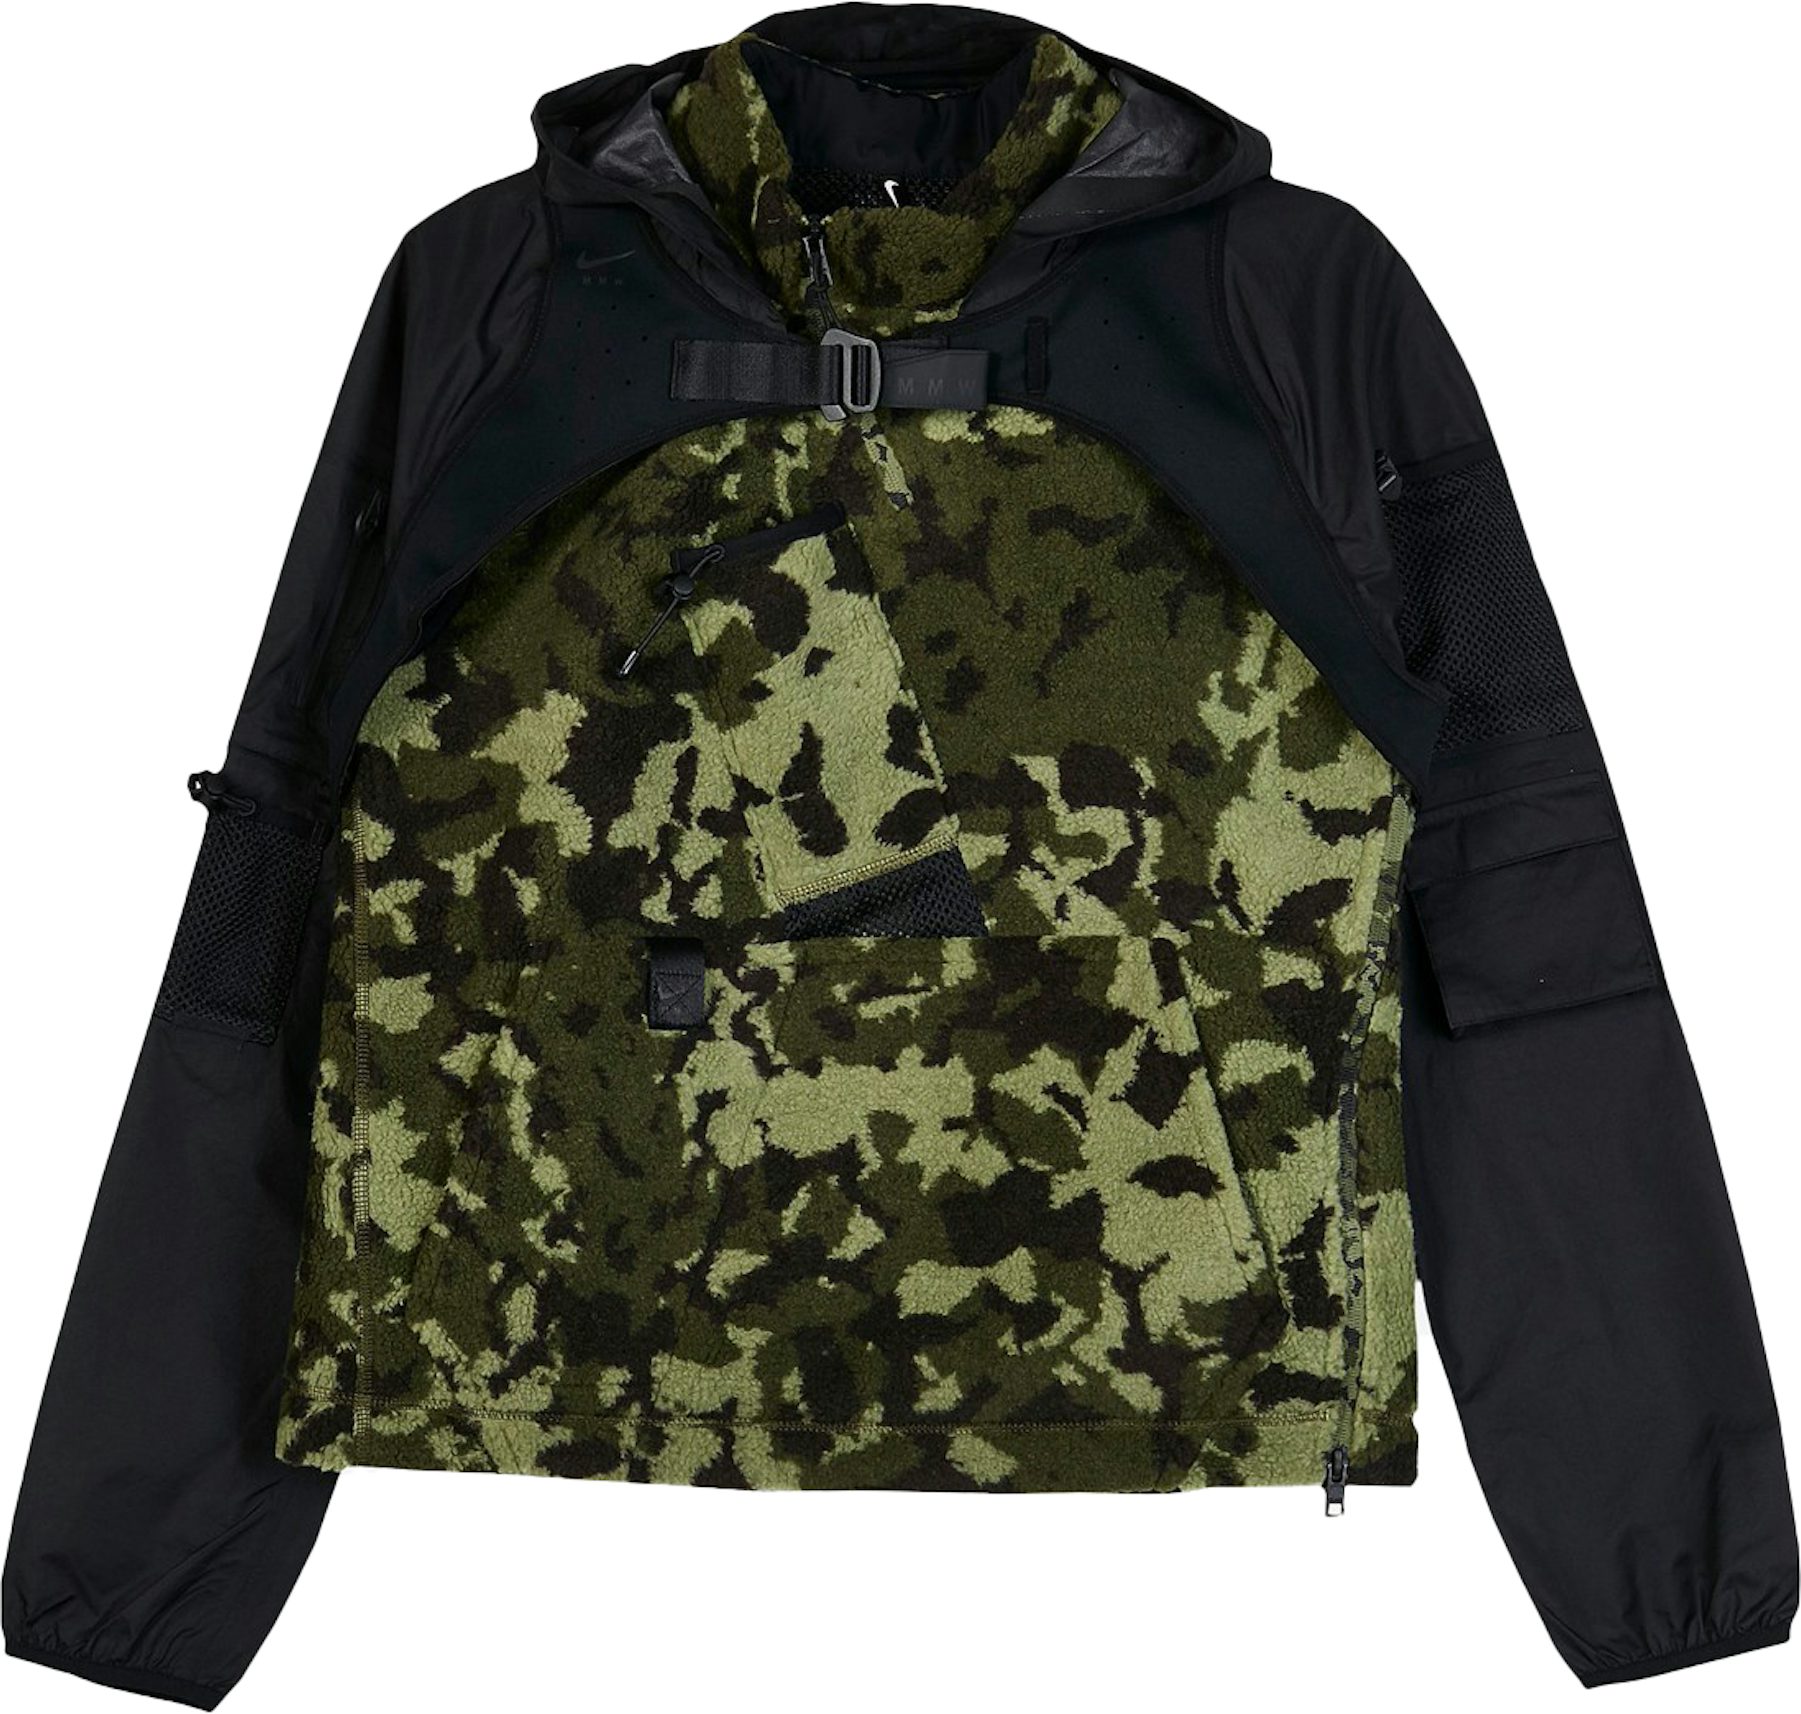 The Weeknd Camo Jacket For Sale - William Jacket